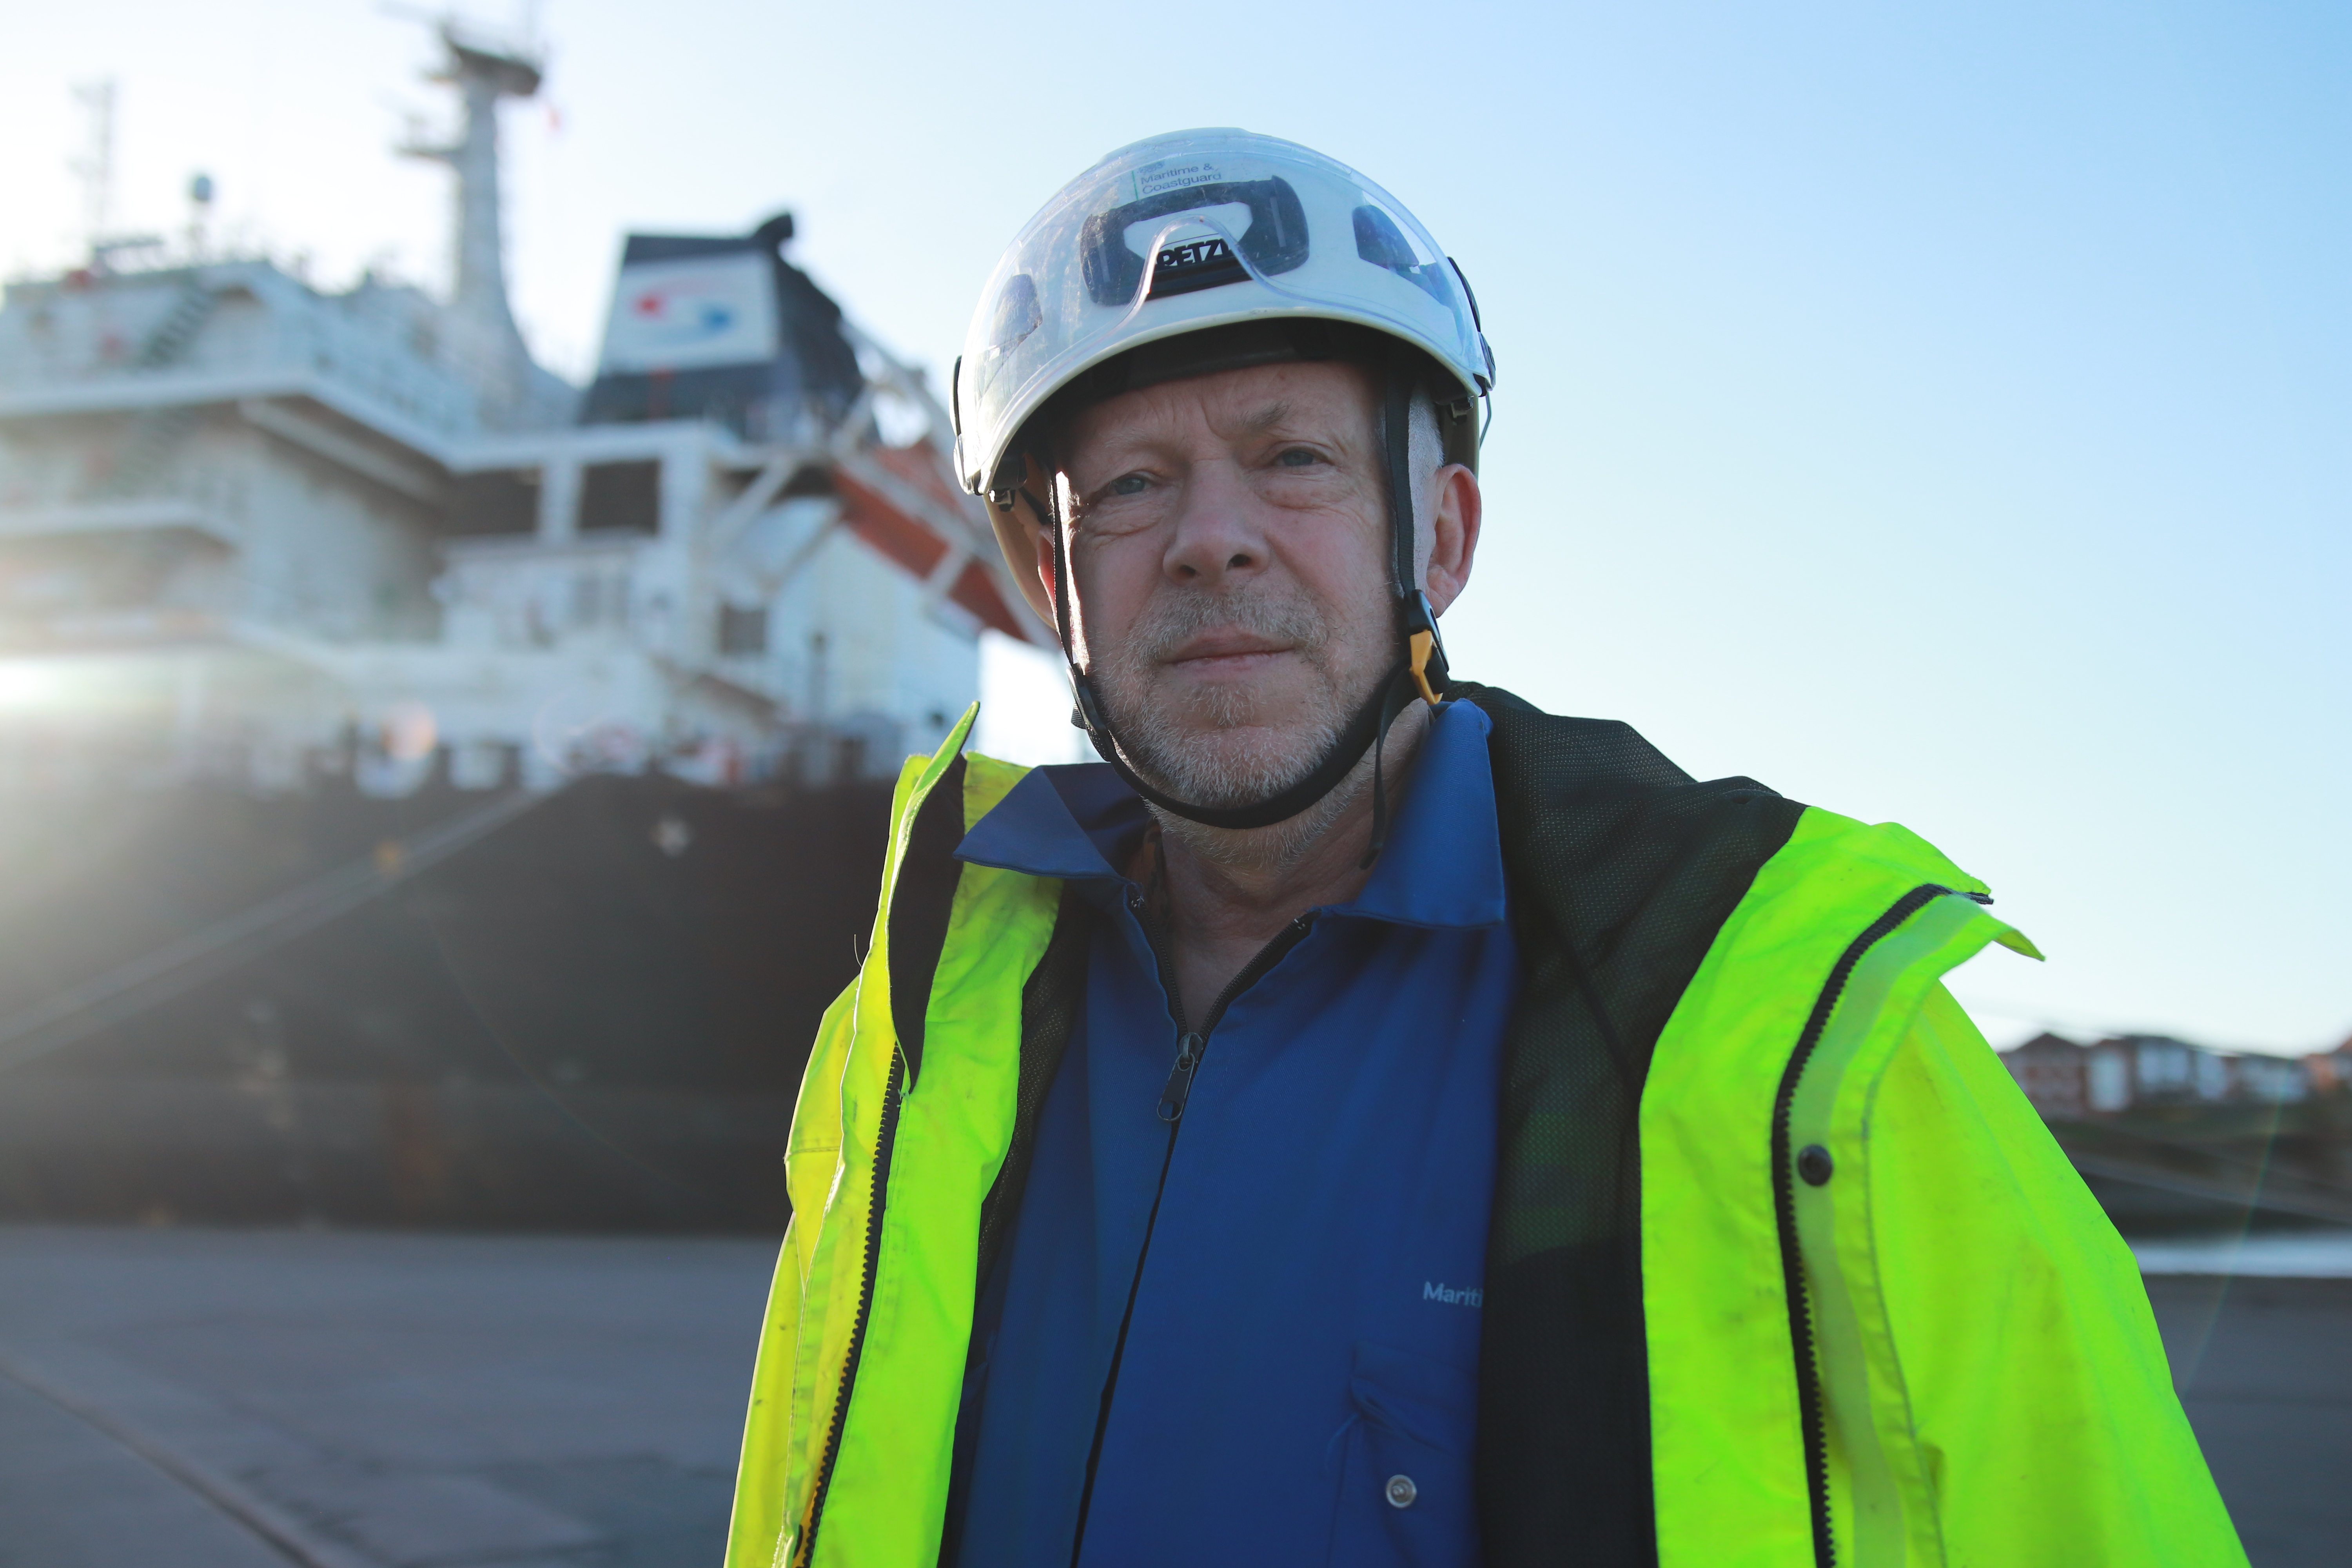 Chris Bates, a Surveyor, stands on the dock with a large vessel in the background